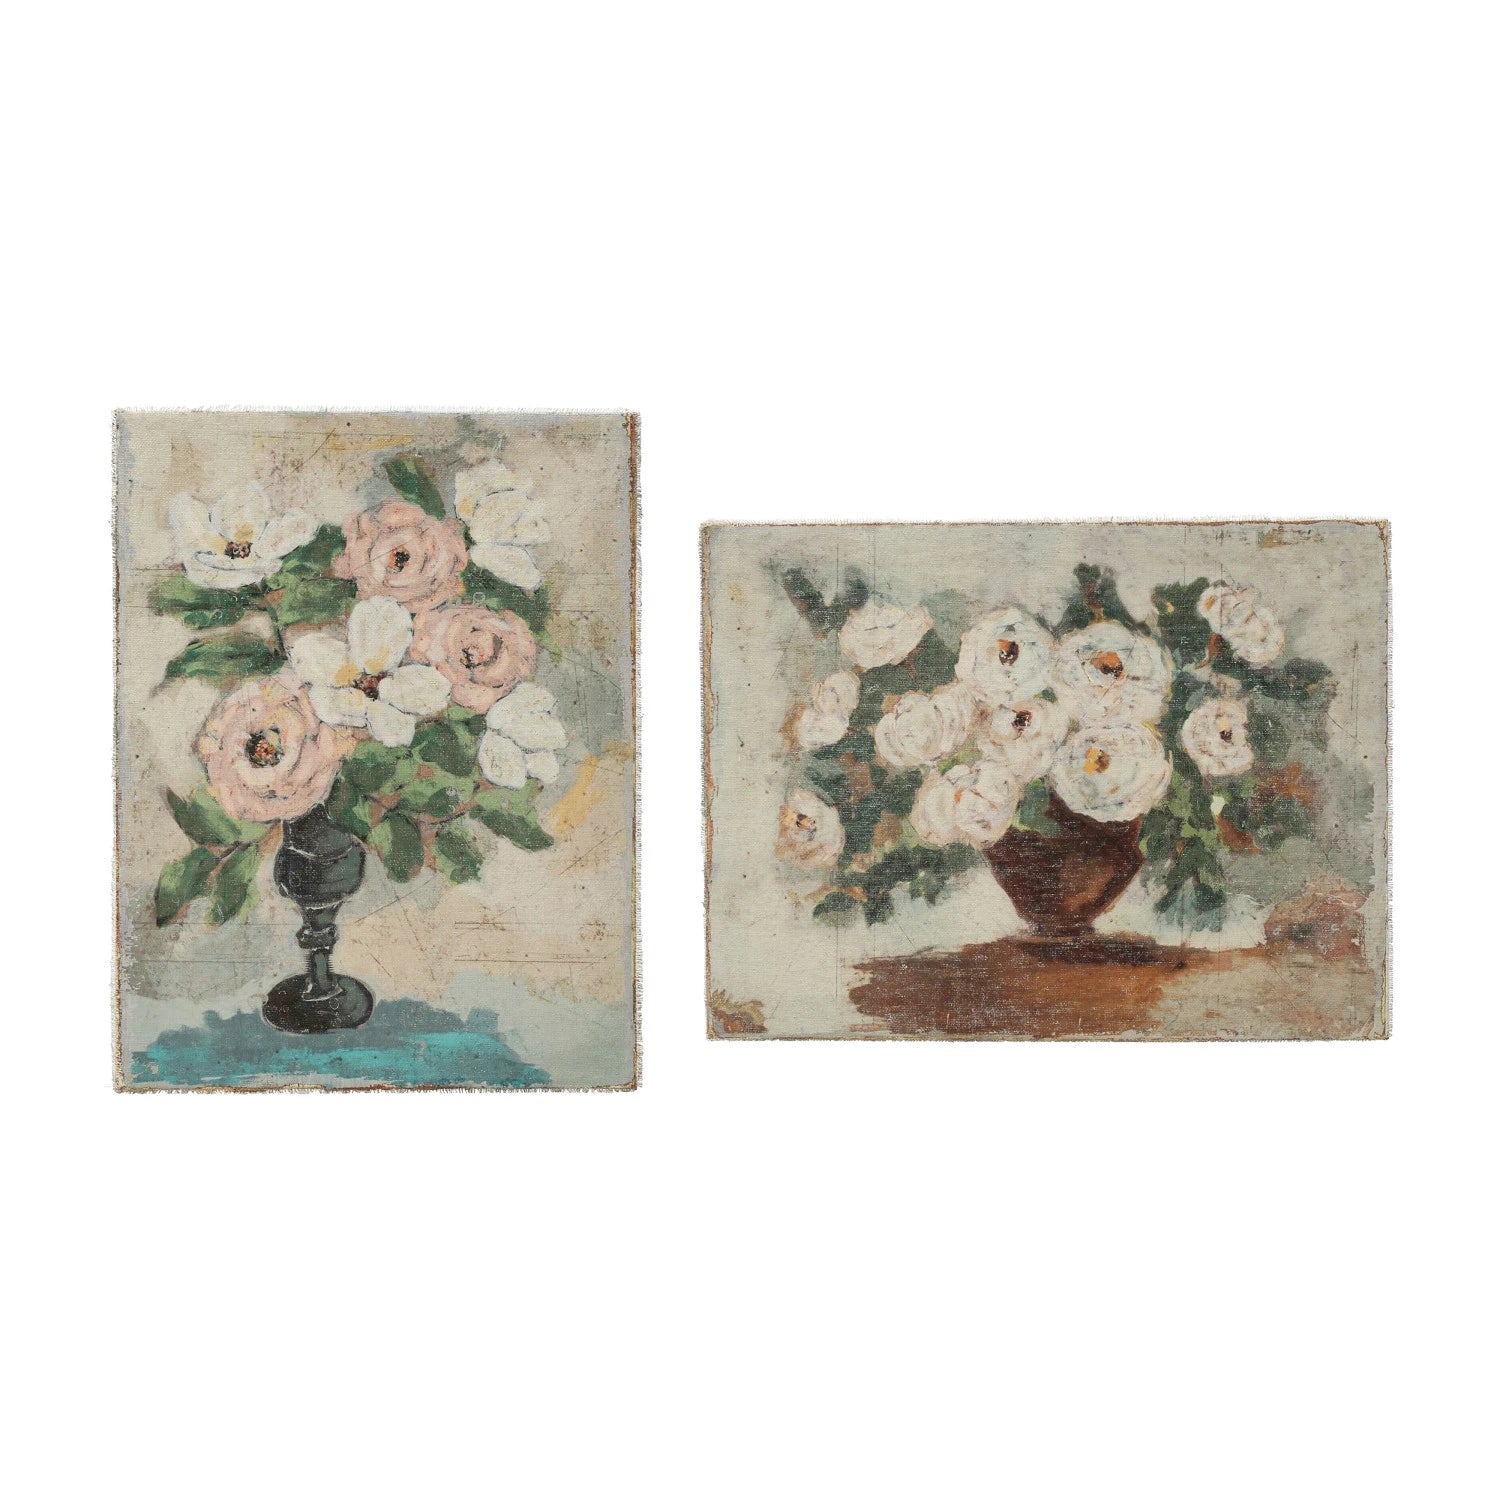 2 floral canvas painting, 1 is vertical with pink and flowers in a black stemmed vase, the other has a brown vase filled with white flowers.